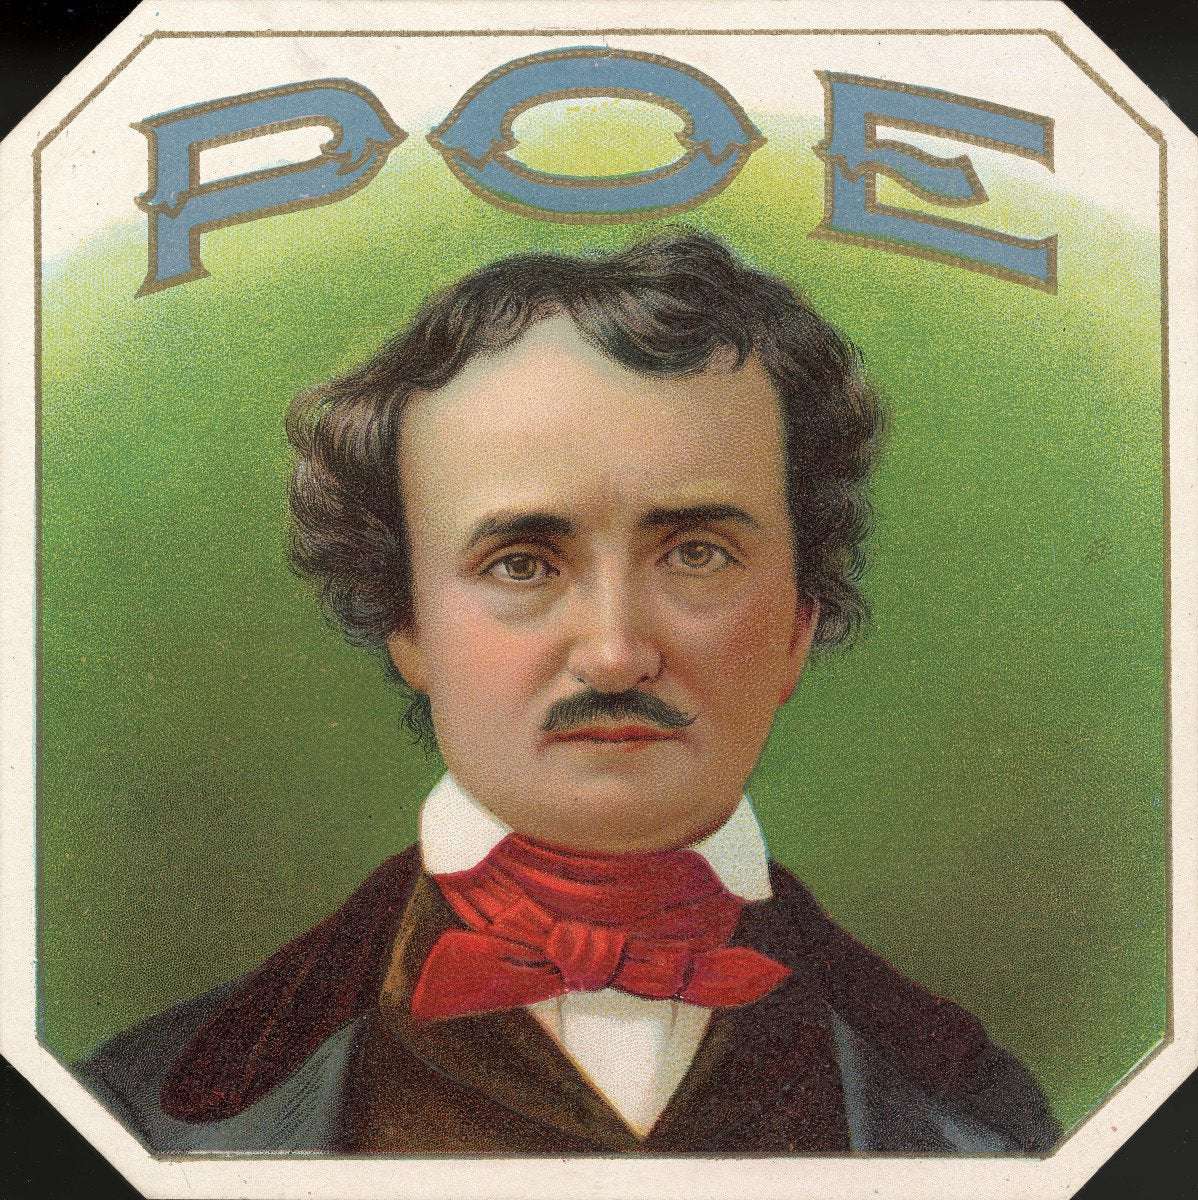 image for The Riddle of Edgar Allan Poe's Death